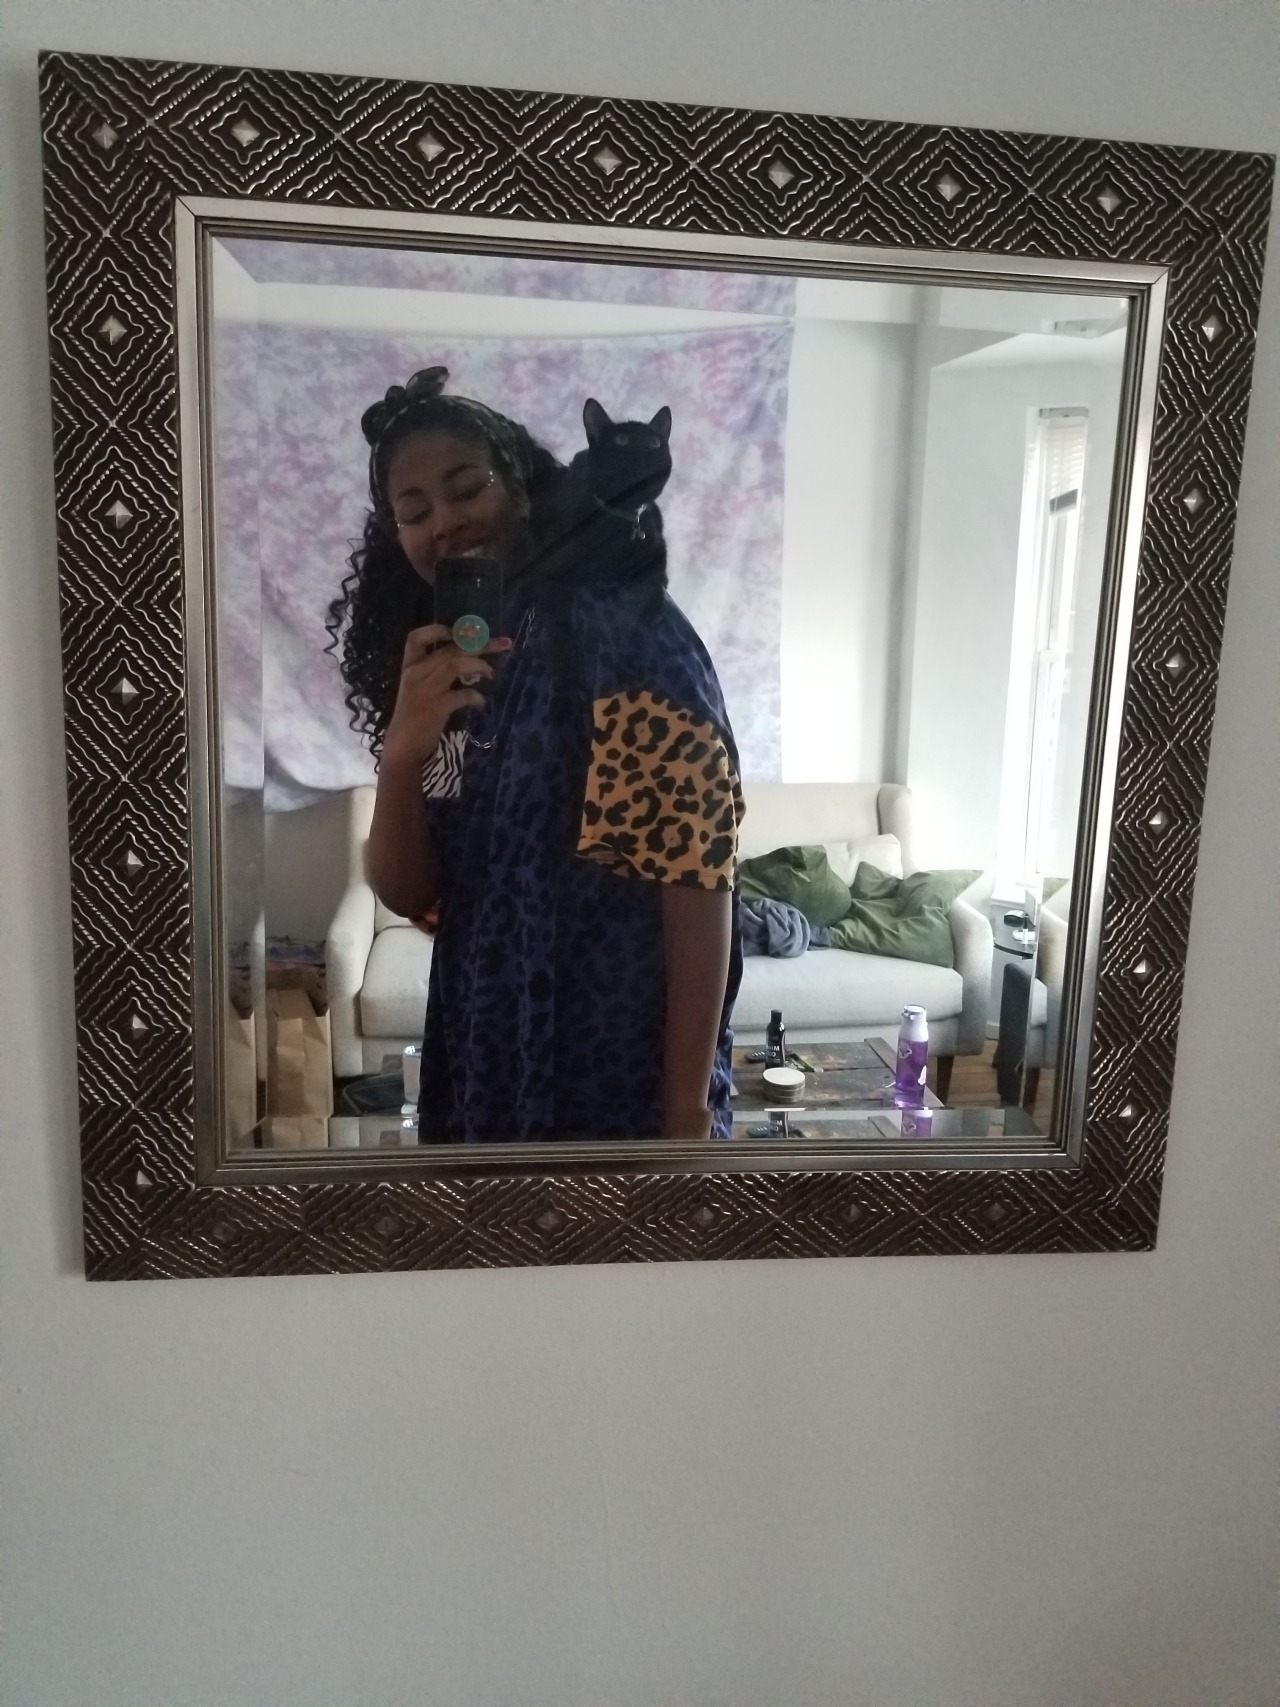 My roommate trained their kitty to sit on ppls shoulder&rsquo;s and now she&rsquo;s